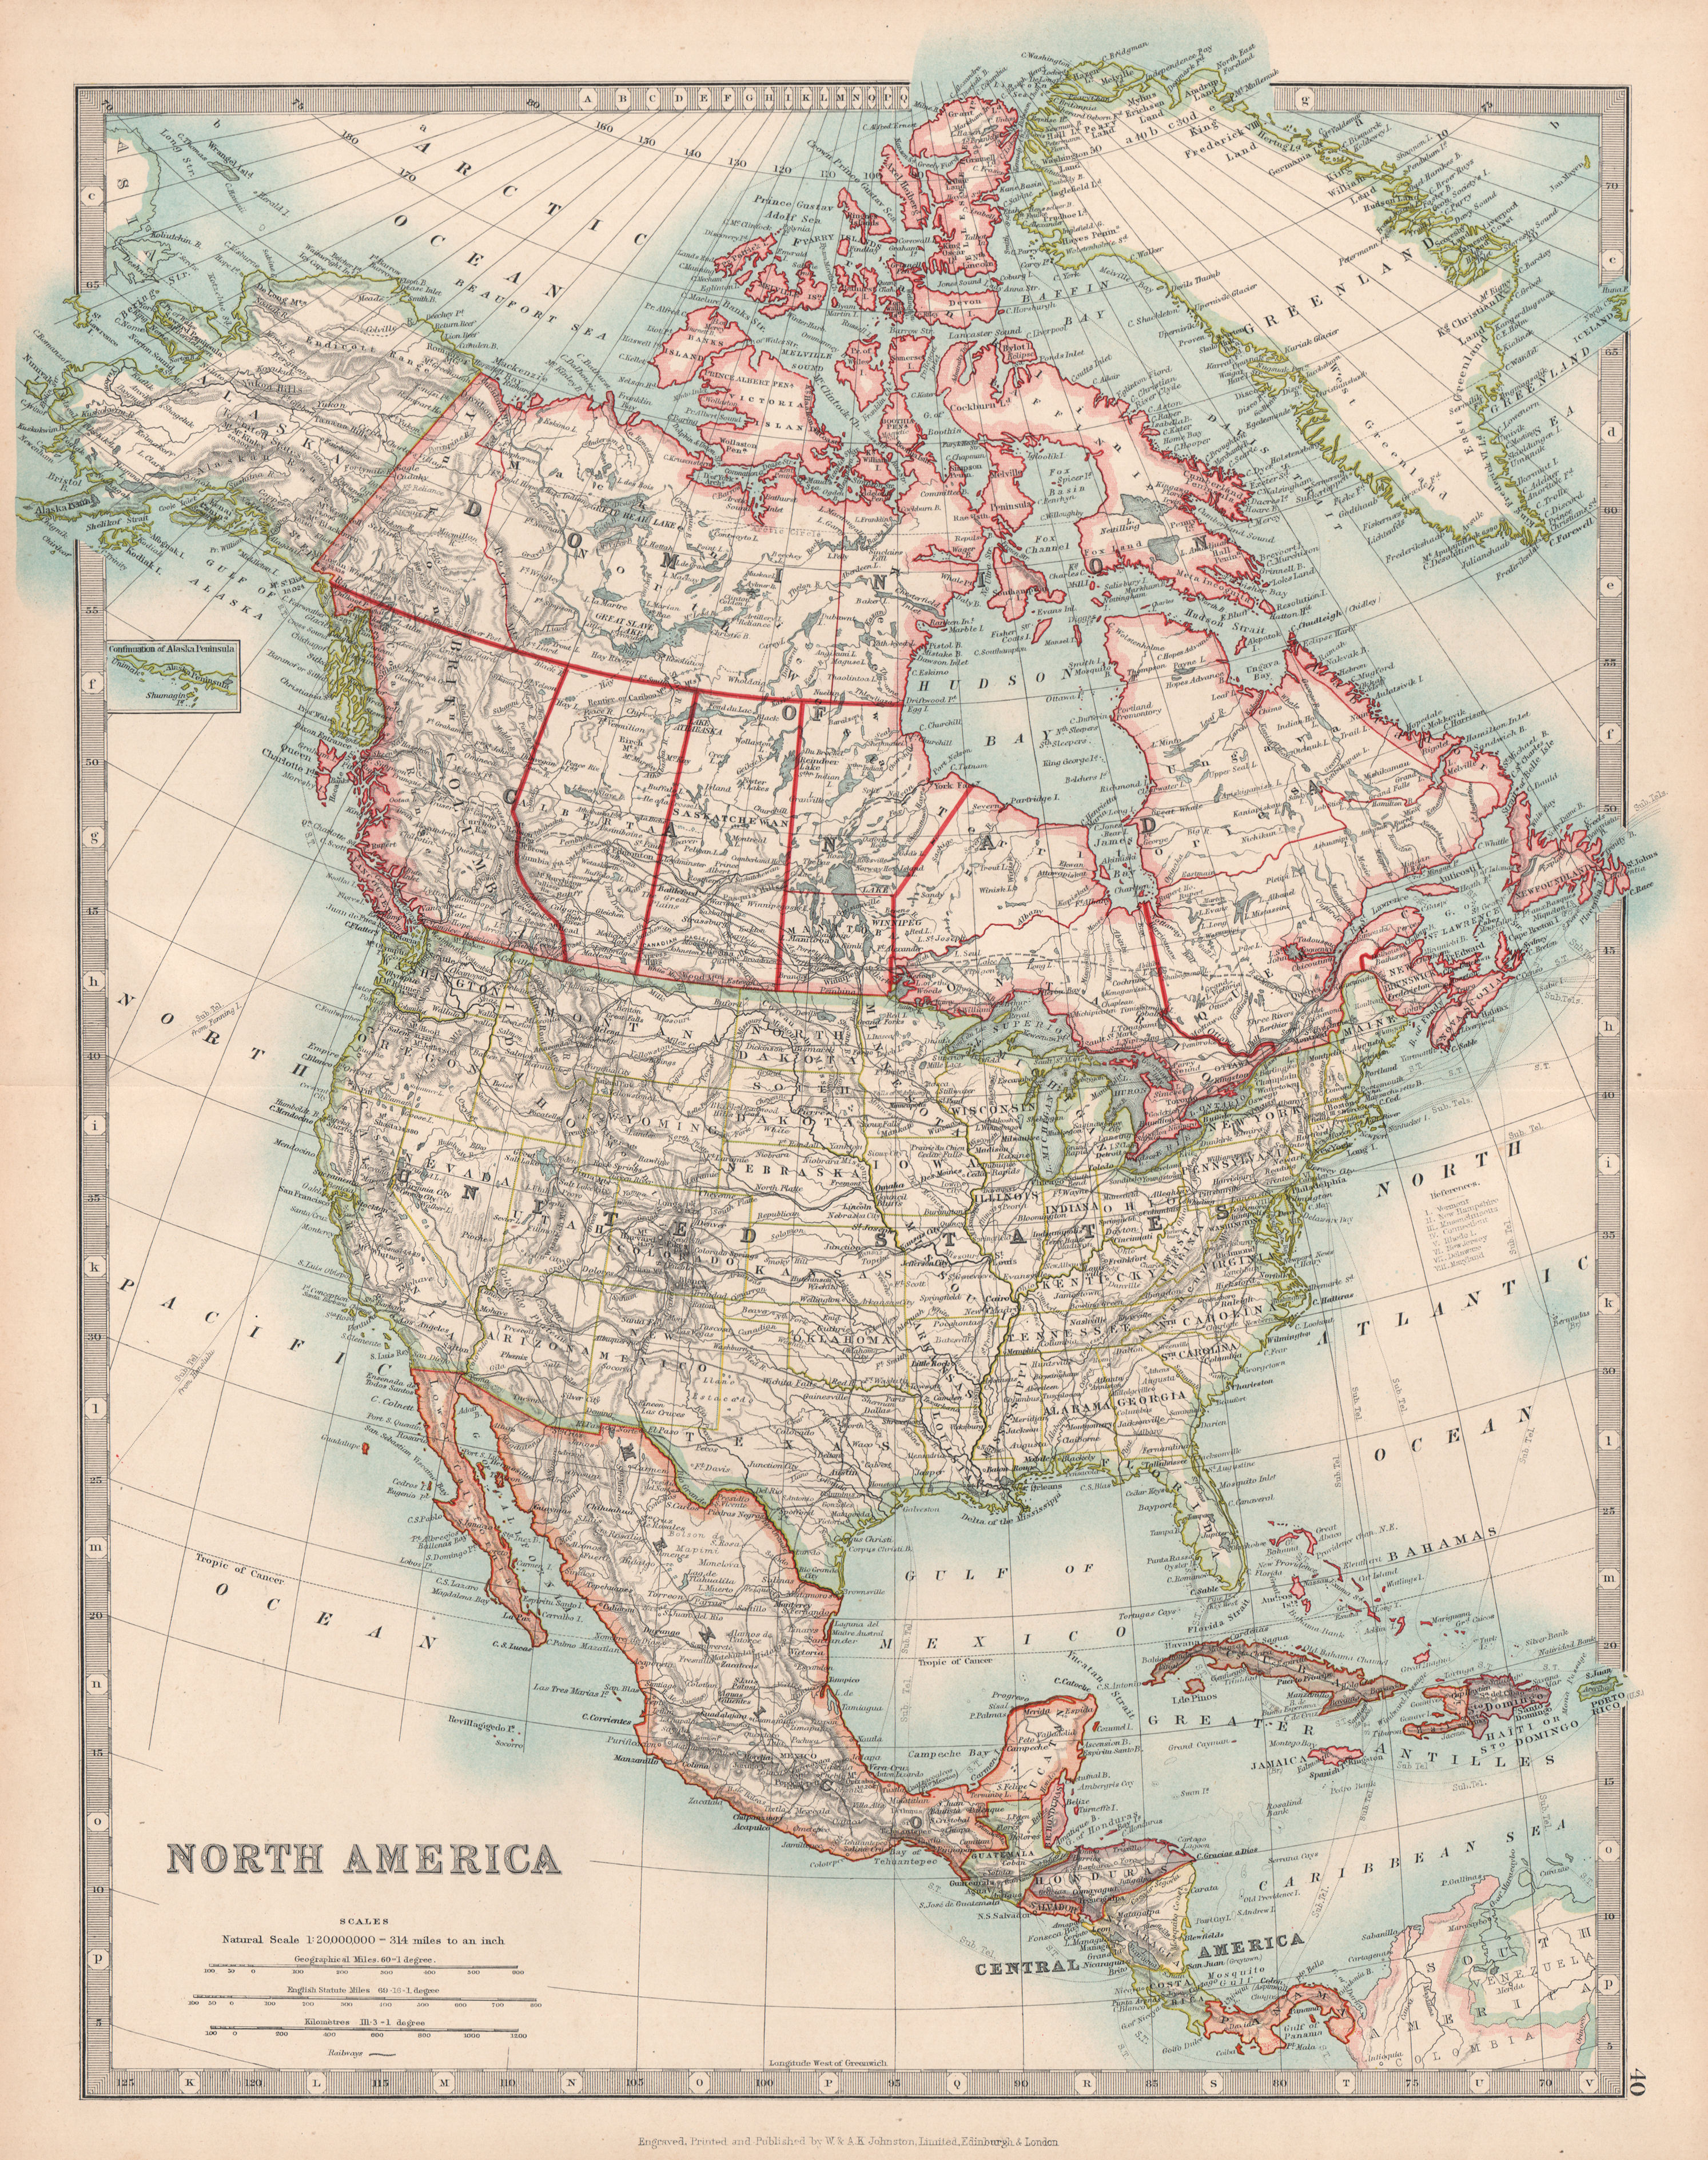 Associate Product NORTH AMERICA. United States Canada Mexico. Railways. JOHNSTON 1912 old map